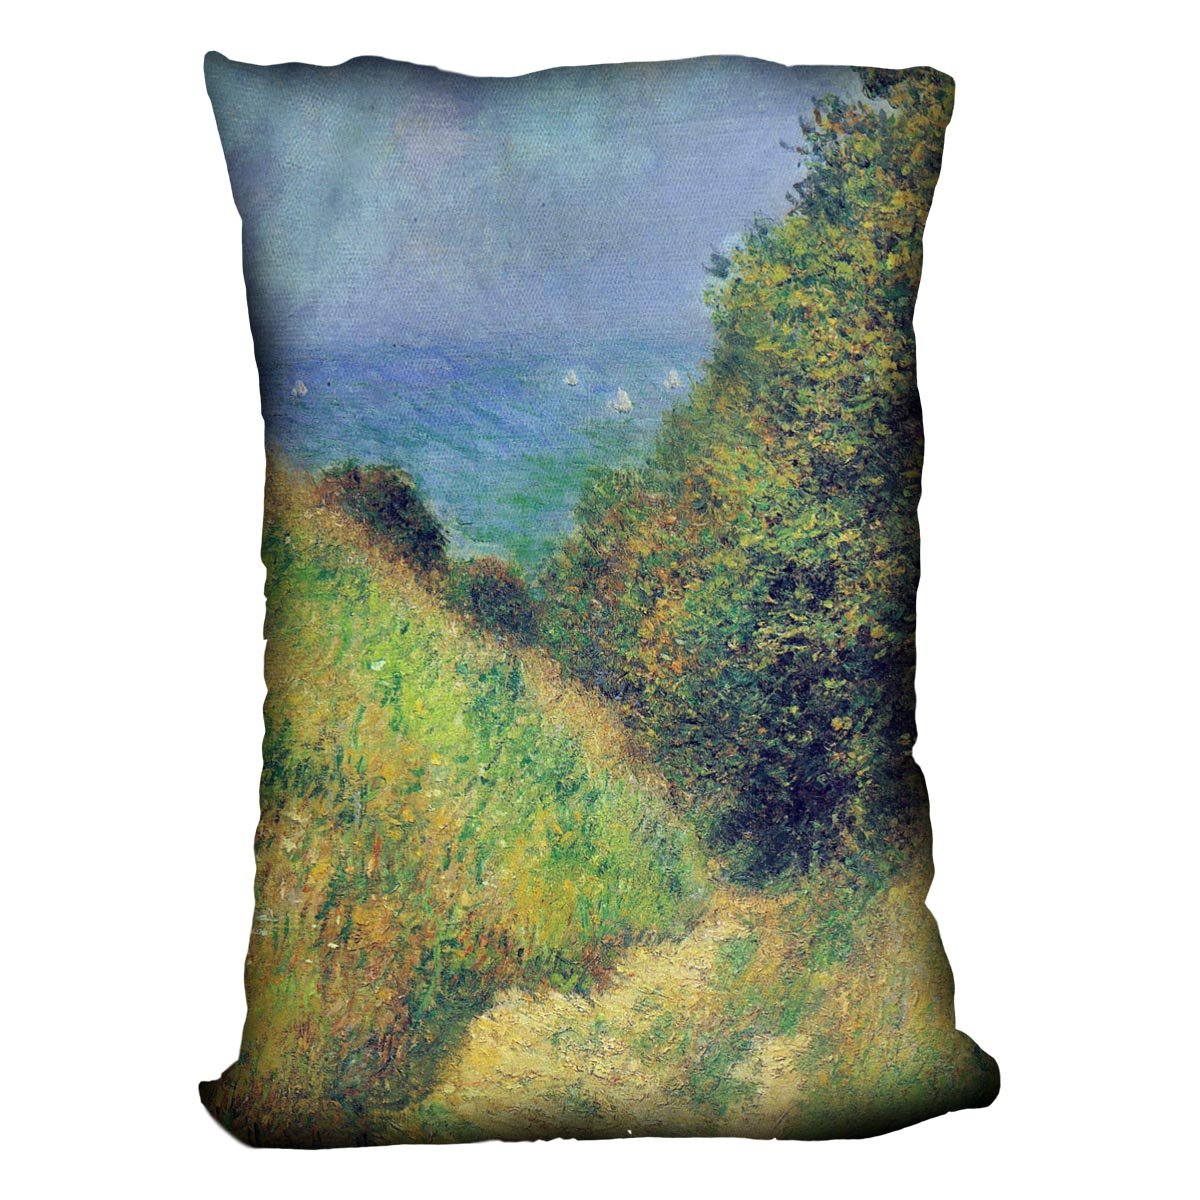 Pourville 2 by Monet Throw Pillow